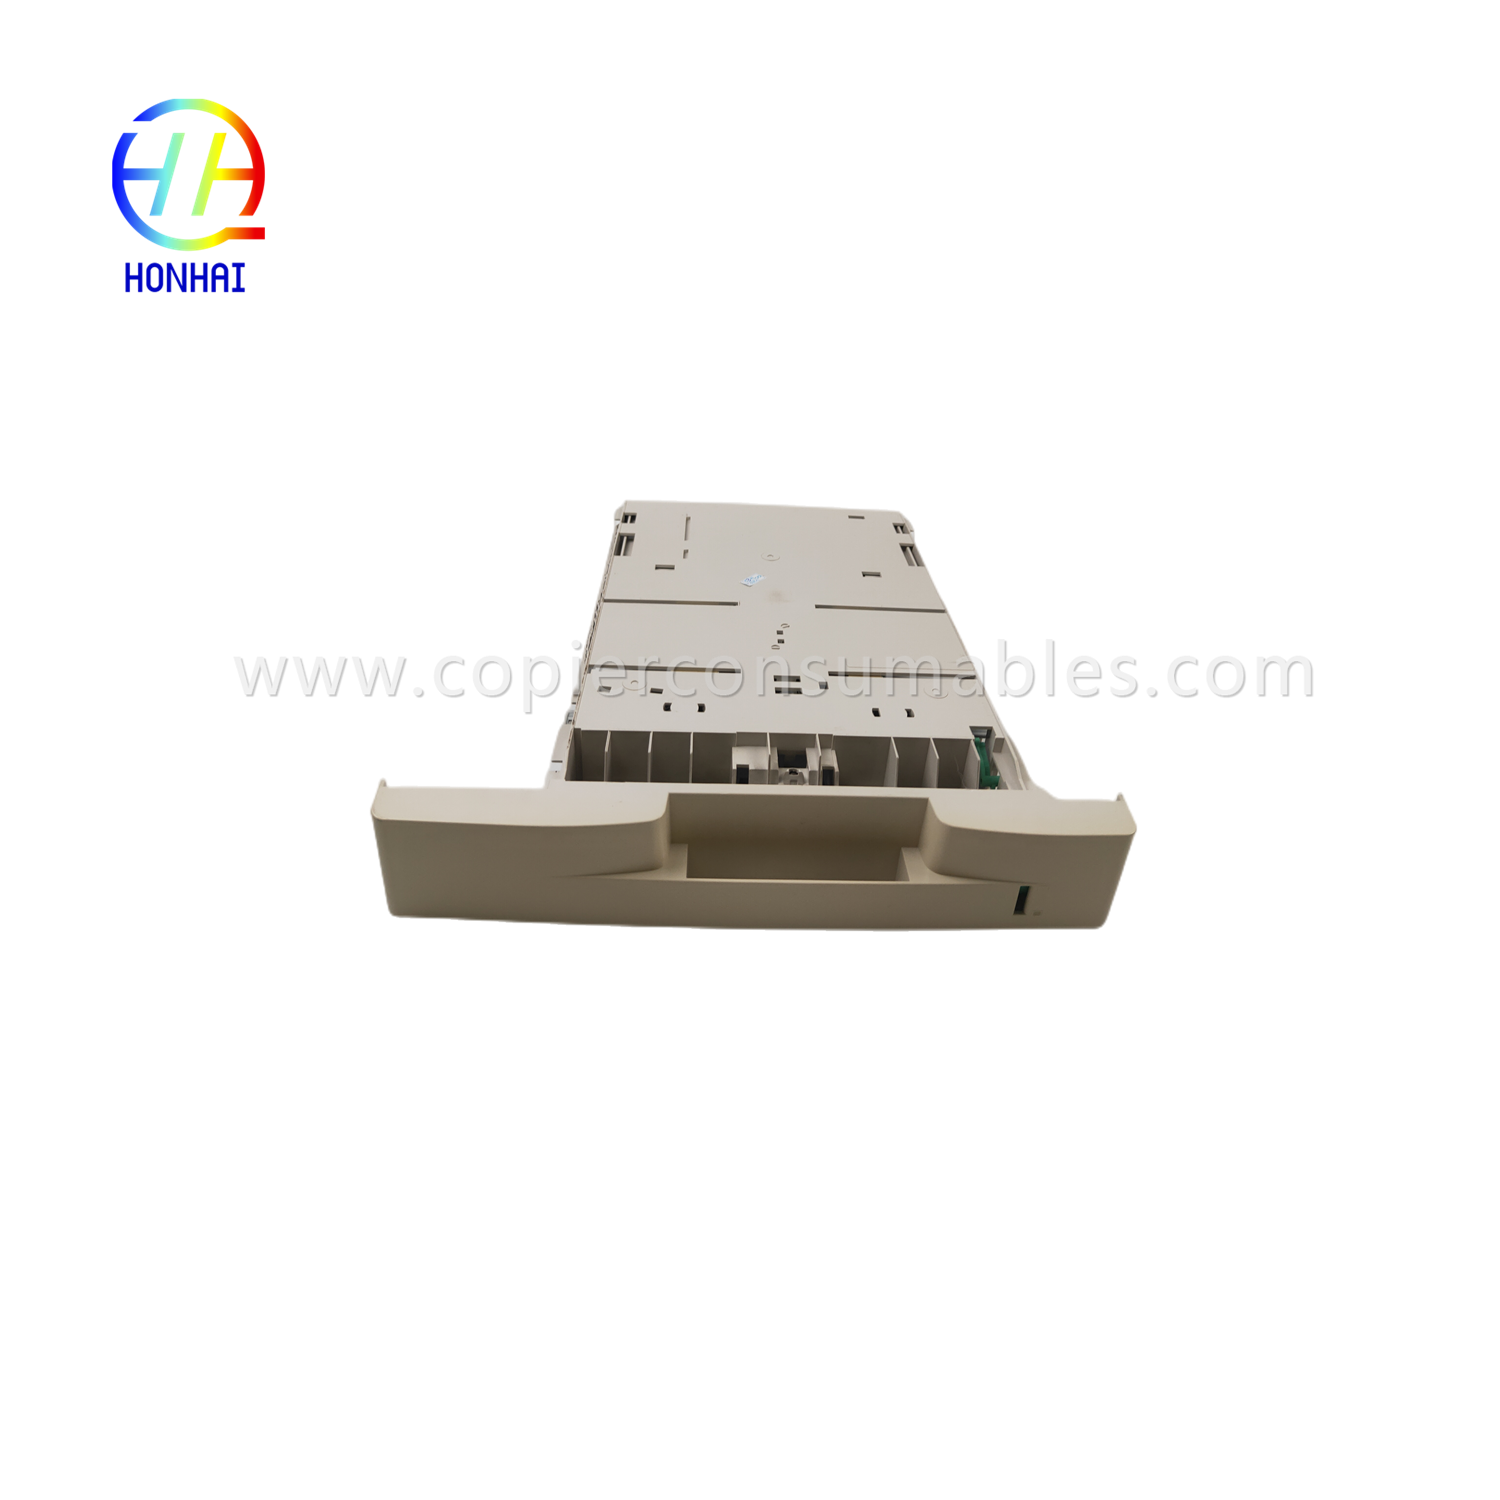 https://c585.goodao.net/cassete-paper-tray-for-xerox-050n00650-phaser-3320dni3315dn-3325dni-product/